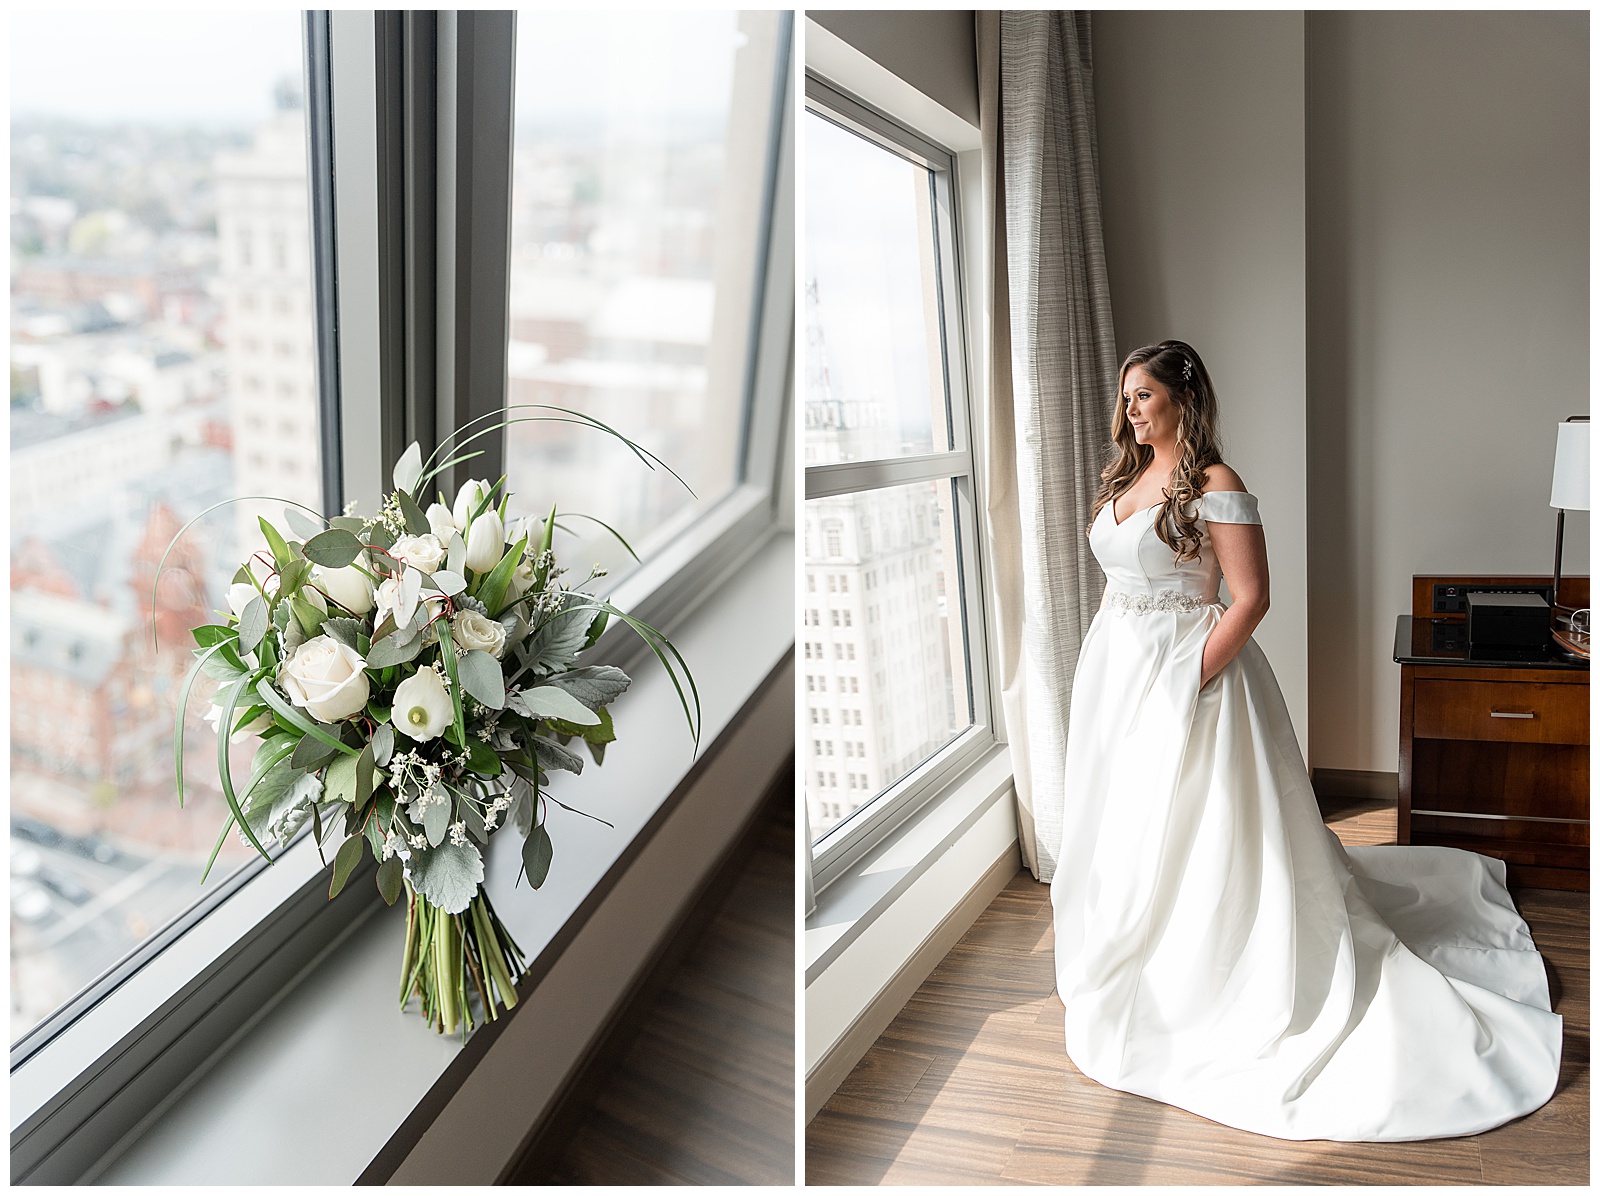 bride looking out large window in hotel room with bridal bouquet on display on window ledge